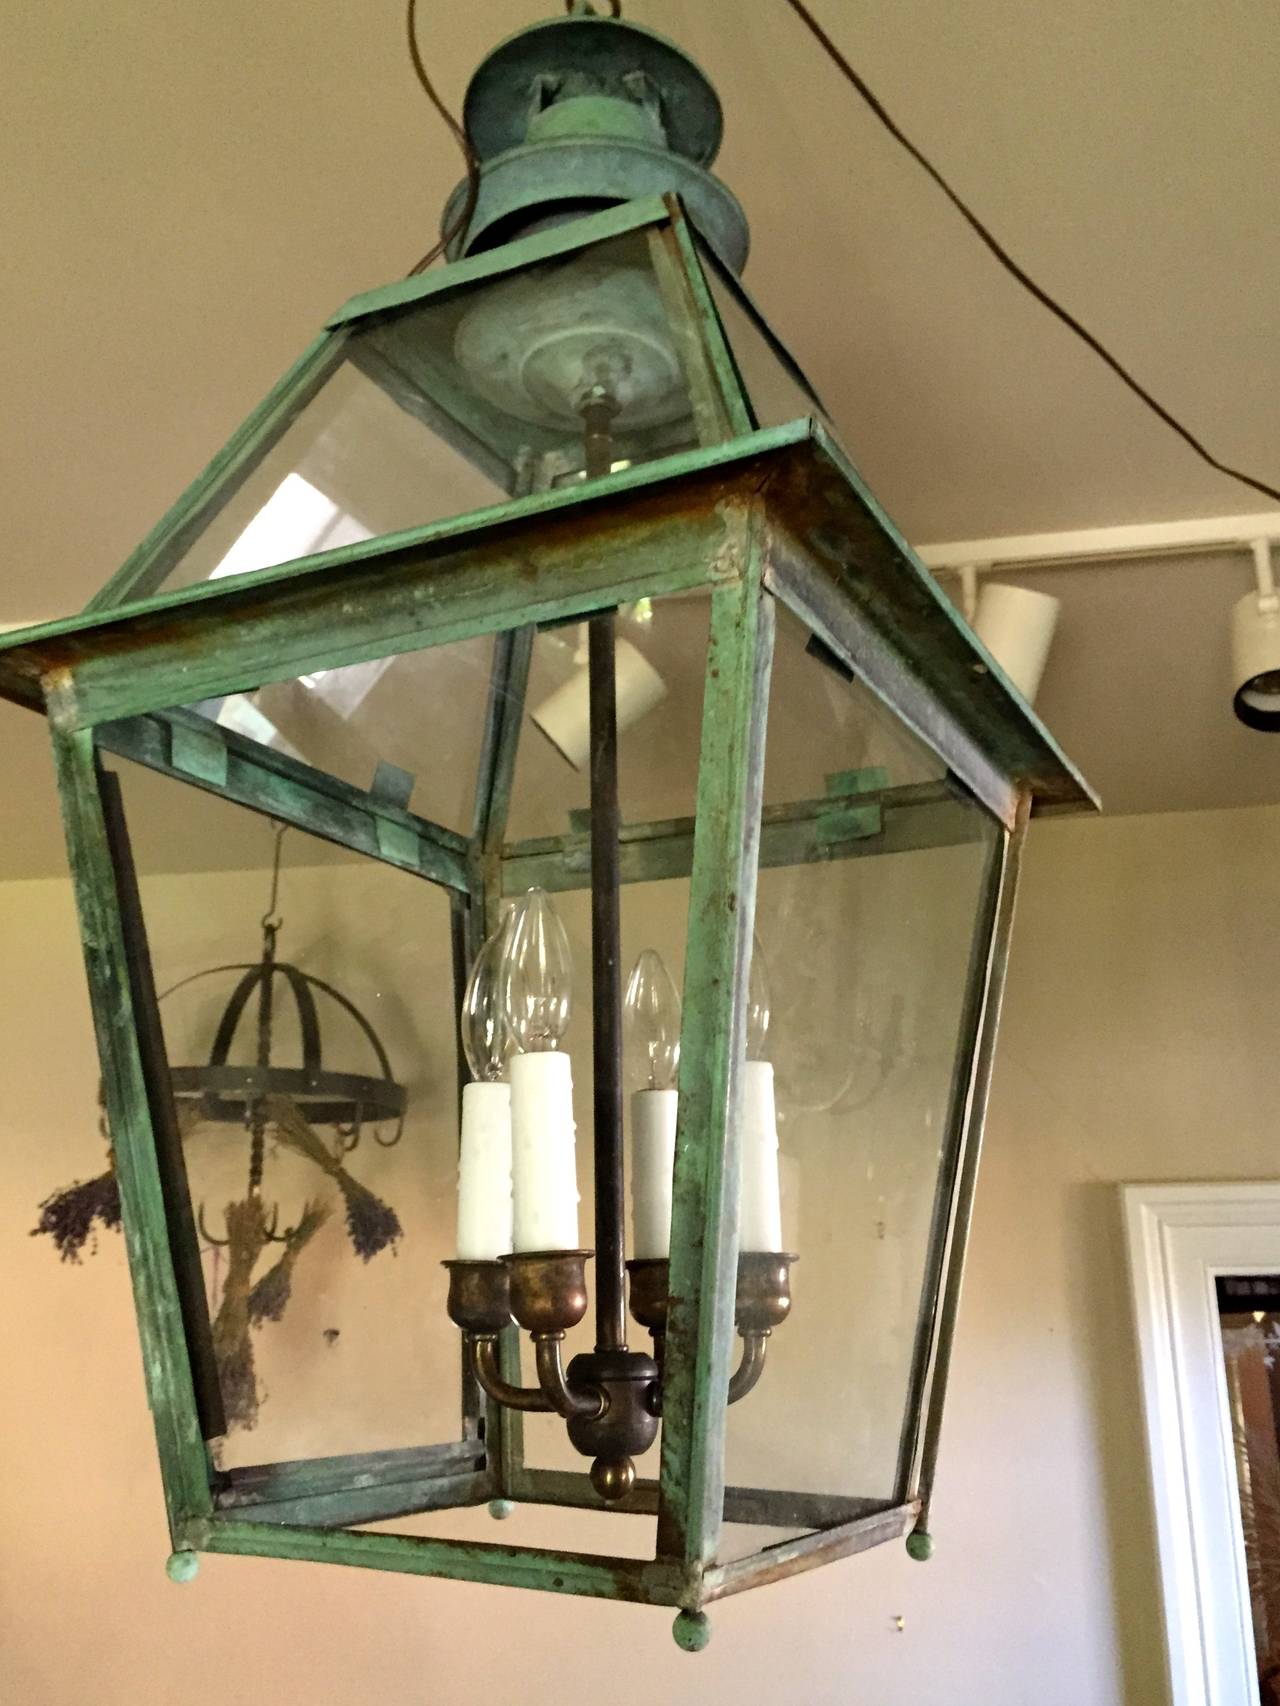 This beauty has an amazing naturally verdigris surface that only 100+ years of exposure to the elements can produce. Found in the US, but certainly English, we have electrified the lantern with a custom antiqued brass four-candle cluster with